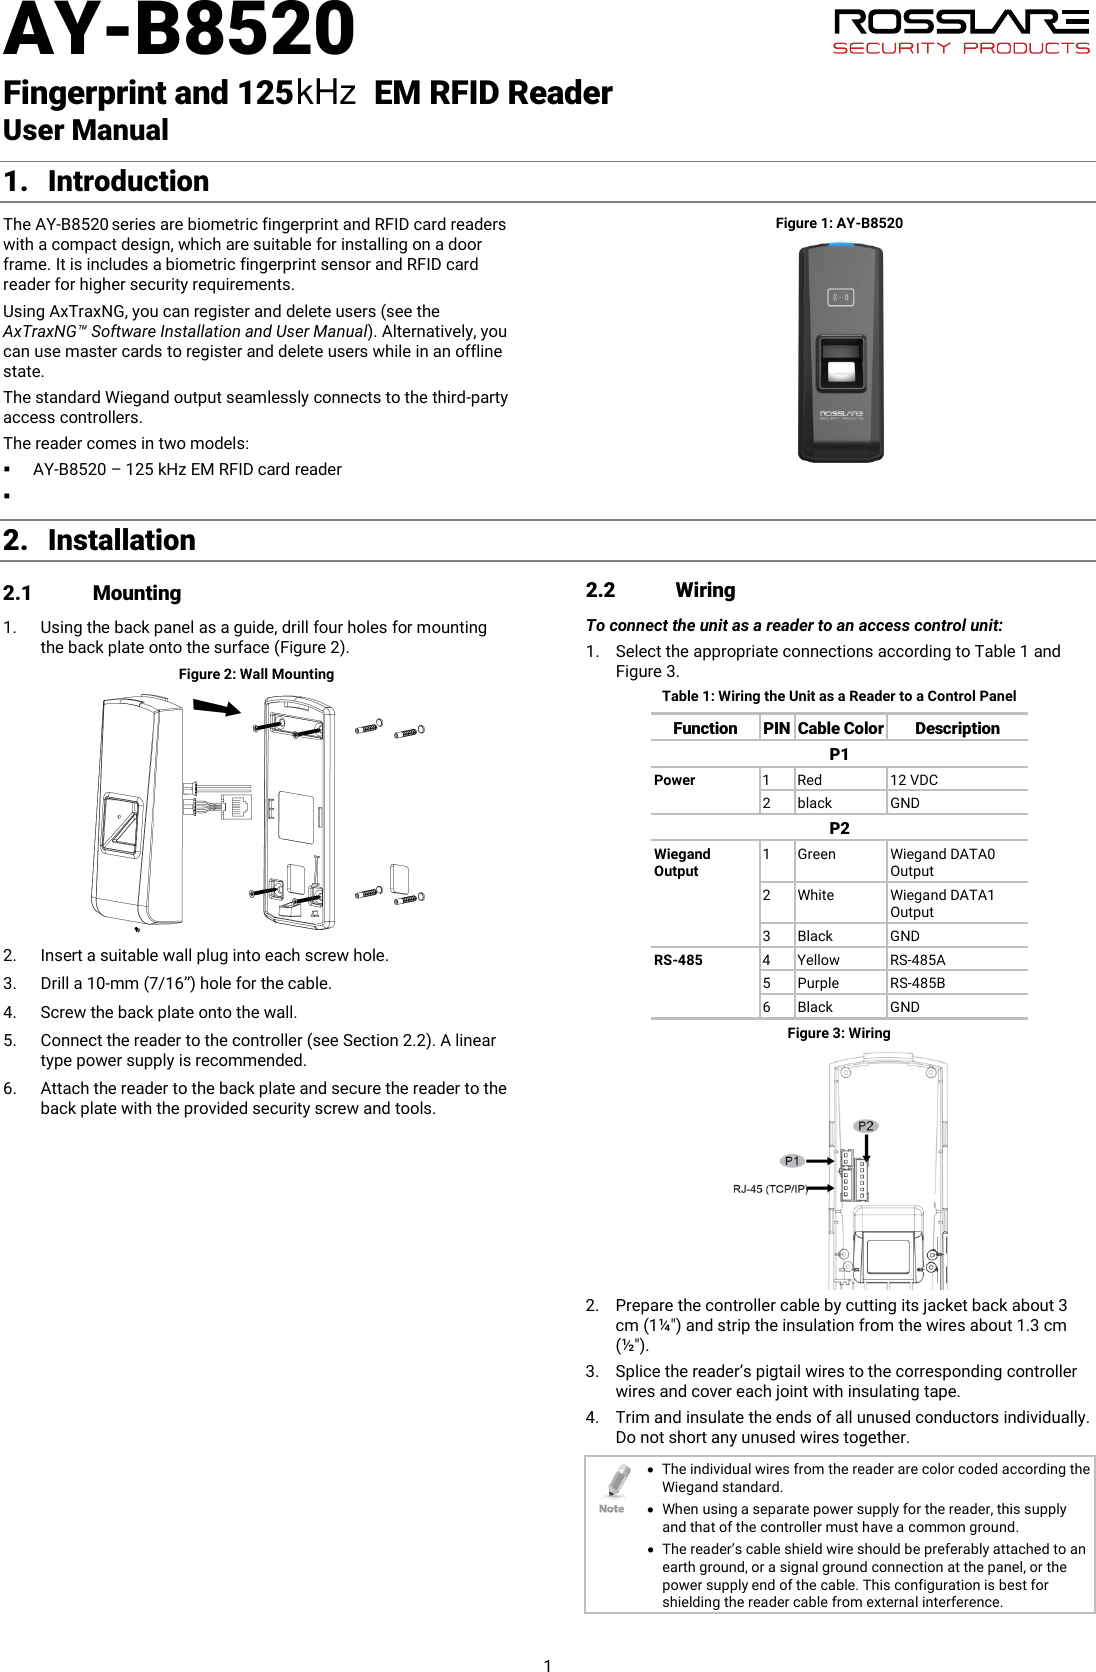 AY-B8520   Fingerprint and 125          EM RFID Reader   User Manual 1 1. Introduction The AY-B8520 series are biometric fingerprint and RFID card readers with a compact design, which are suitable for installing on a door frame. It is includes a biometric fingerprint sensor and RFID card reader for higher security requirements. Using AxTraxNG, you can register and delete users (see the AxTraxNG™ Software Installation and User Manual). Alternatively, you can use master cards to register and delete users while in an offline state. The standard Wiegand output seamlessly connects to the third-party access controllers. The reader comes in two models:  AY-B8520 – 125 kHz EM RFID card reader  Figure 1: AY-B8520 2. Installation 2.1 Mounting 1. Using the back panel as a guide, drill four holes for mounting the back plate onto the surface (Figure 2). Figure 2: Wall Mounting  2. Insert a suitable wall plug into each screw hole. 3. Drill a 10-mm (7/16”) hole for the cable. 4. Screw the back plate onto the wall. 5. Connect the reader to the controller (see Section  2.2). A linear type power supply is recommended. 6. Attach the reader to the back plate and secure the reader to the back plate with the provided security screw and tools. 2.2 Wiring To connect the unit as a reader to an access control unit: 1. Select the appropriate connections according to Table 1 and Figure 3. Table 1: Wiring the Unit as a Reader to a Control Panel Function PIN Cable Color Description P1 Power 1  Red 12 VDC 2  black GND P2 Wiegand Output 1  Green Wiegand DATA0 Output 2  White Wiegand DATA1 Output 3  Black GND RS-485 4  Yellow RS-485A 5  Purple RS-485B 6  Black GND  Figure 3: Wiring  2. Prepare the controller cable by cutting its jacket back about 3 cm (1¼&quot;) and strip the insulation from the wires about 1.3 cm (½&quot;). 3. Splice the reader’s pigtail wires to the corresponding controller wires and cover each joint with insulating tape. 4. Trim and insulate the ends of all unused conductors individually. Do not short any unused wires together.  • The individual wires from the reader are color coded according the Wiegand standard. • When using a separate power supply for the reader, this supply and that of the controller must have a common ground. • The reader’s cable shield wire should be preferably attached to an earth ground, or a signal ground connection at the panel, or the power supply end of the cable. This configuration is best for shielding the reader cable from external interference.  kHz